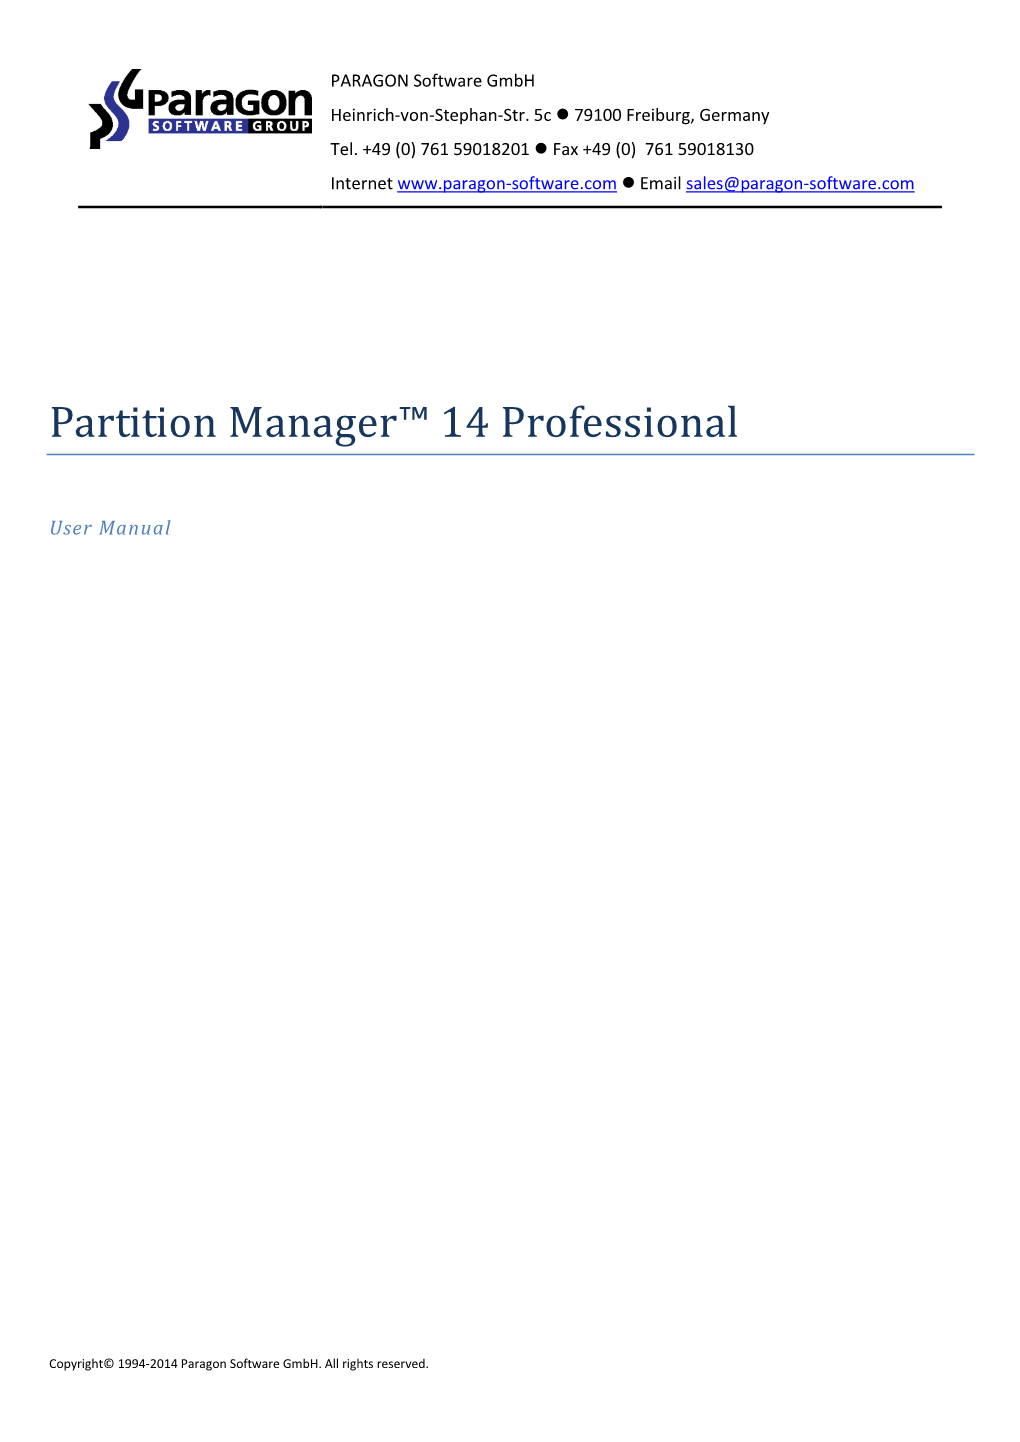 Partition Manager™ 14 Professional